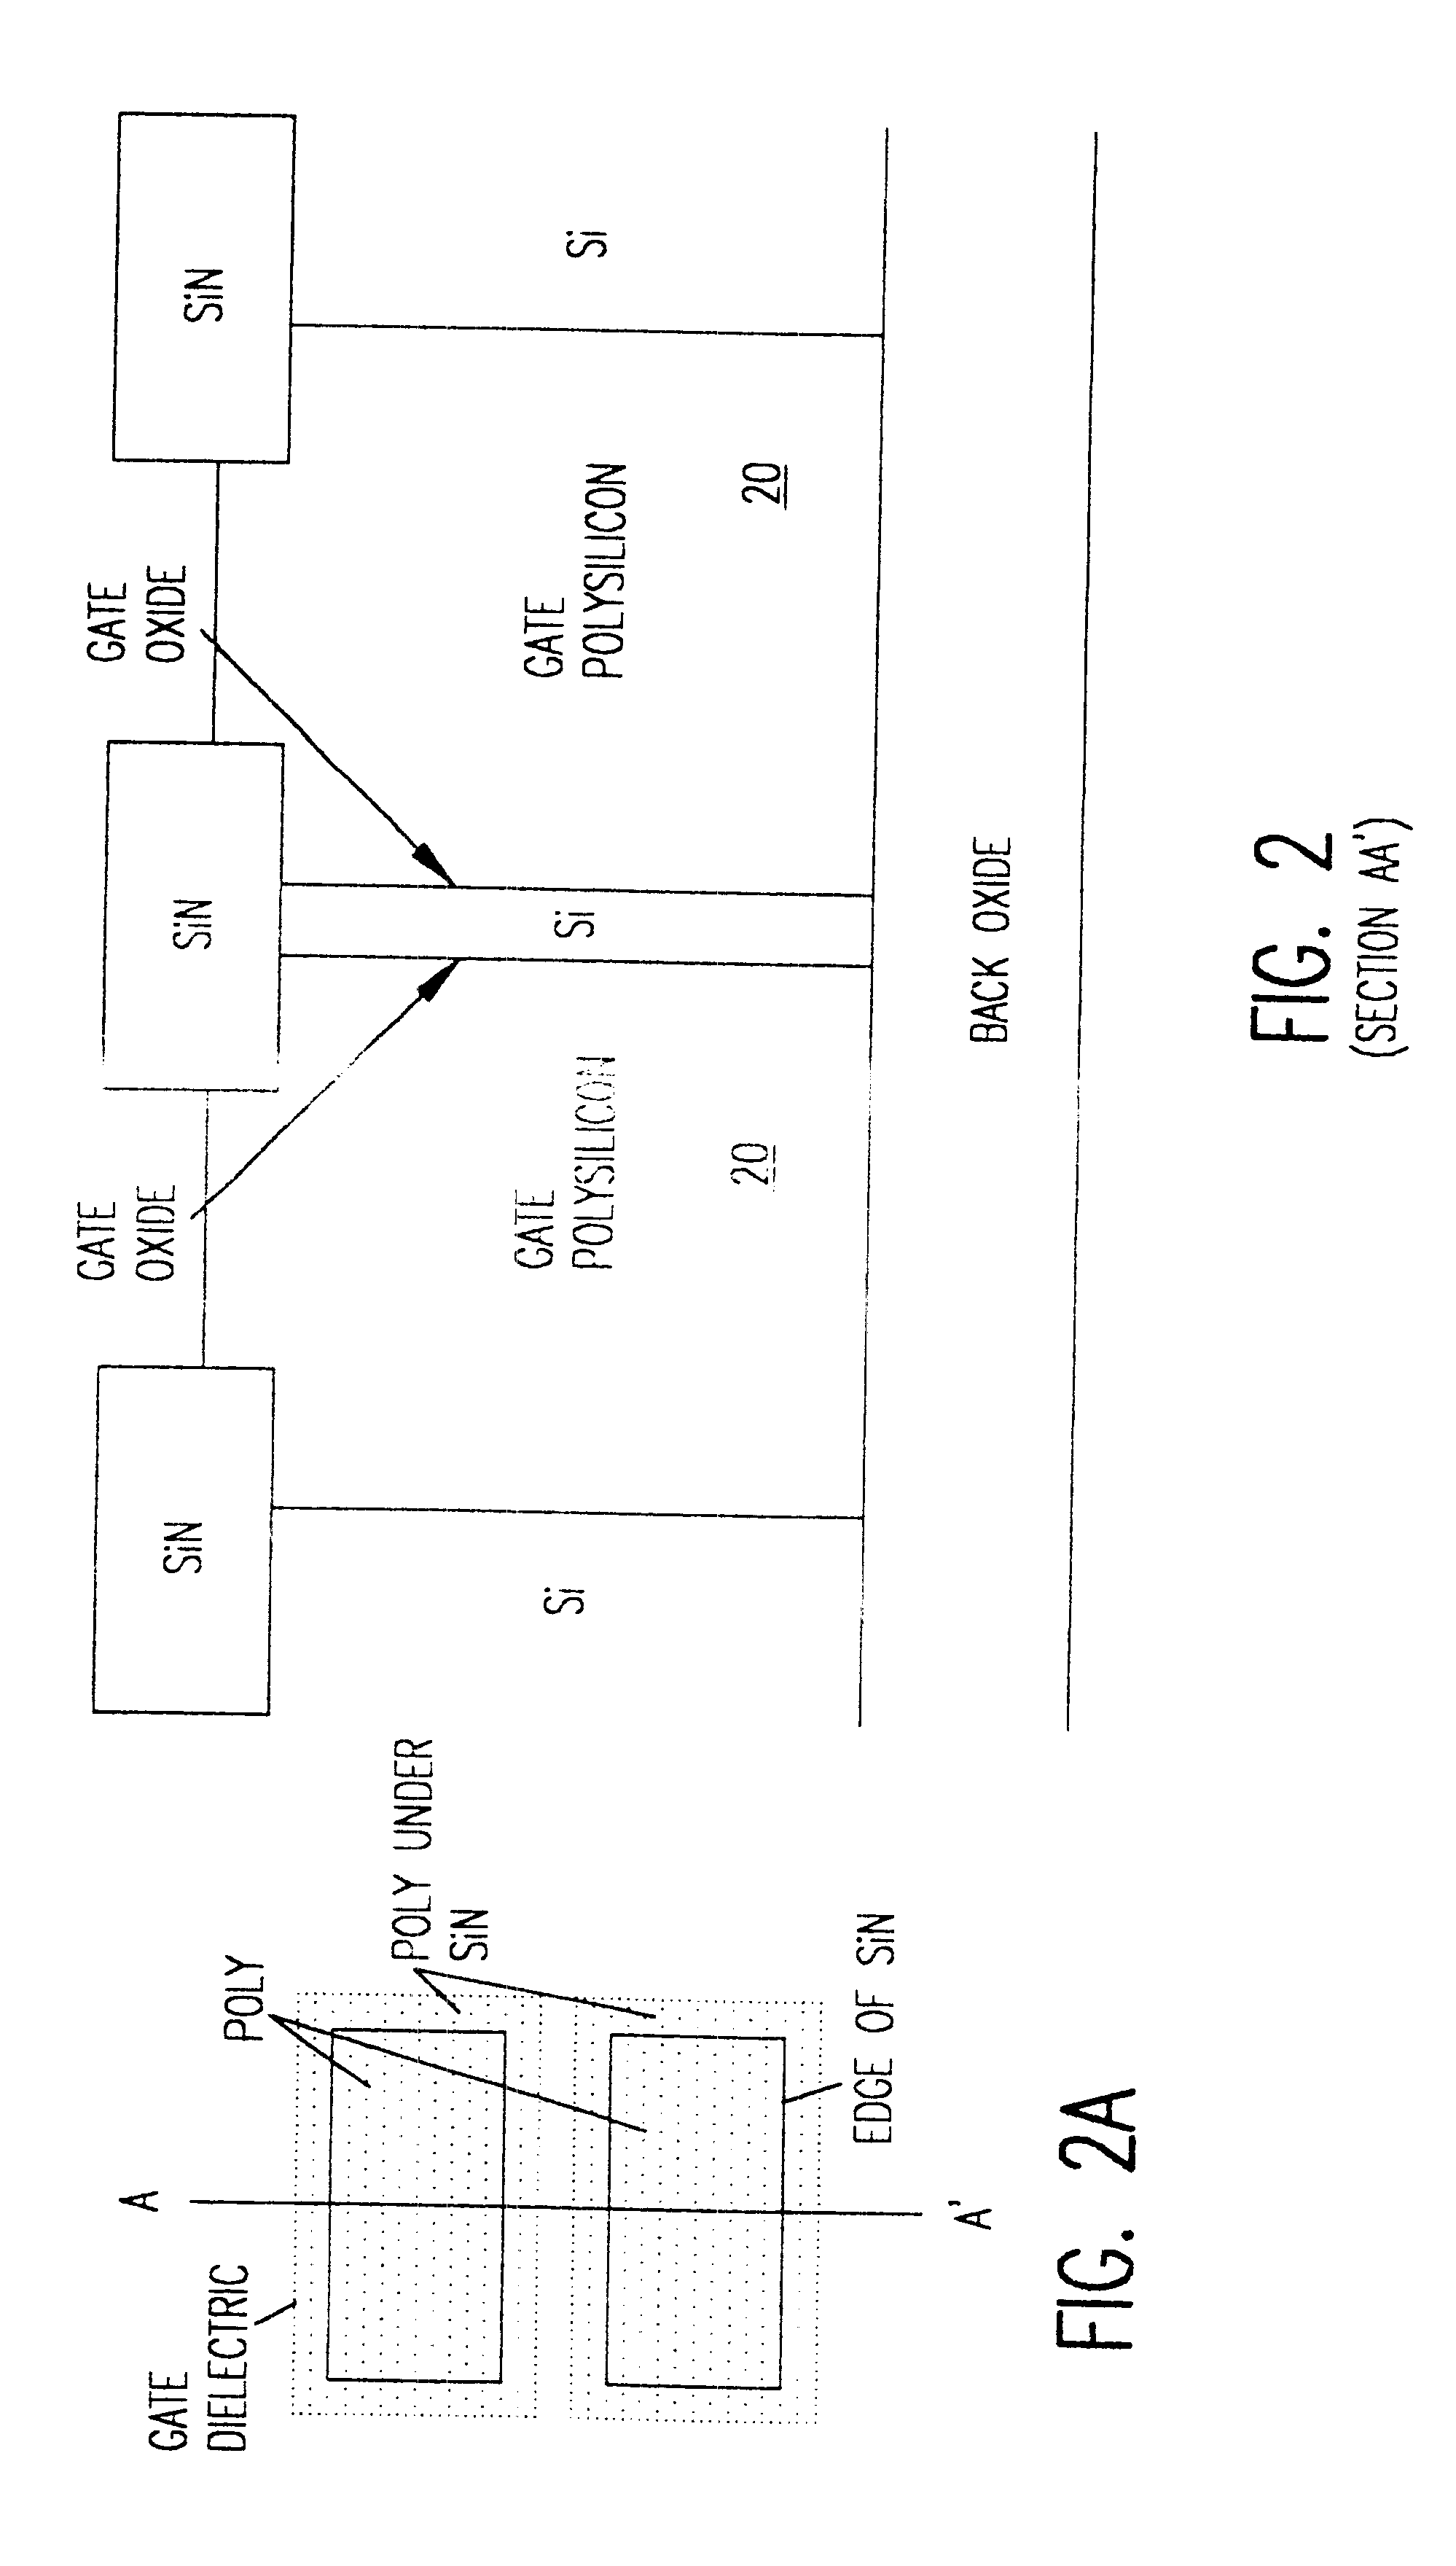 Double gate trench transistor